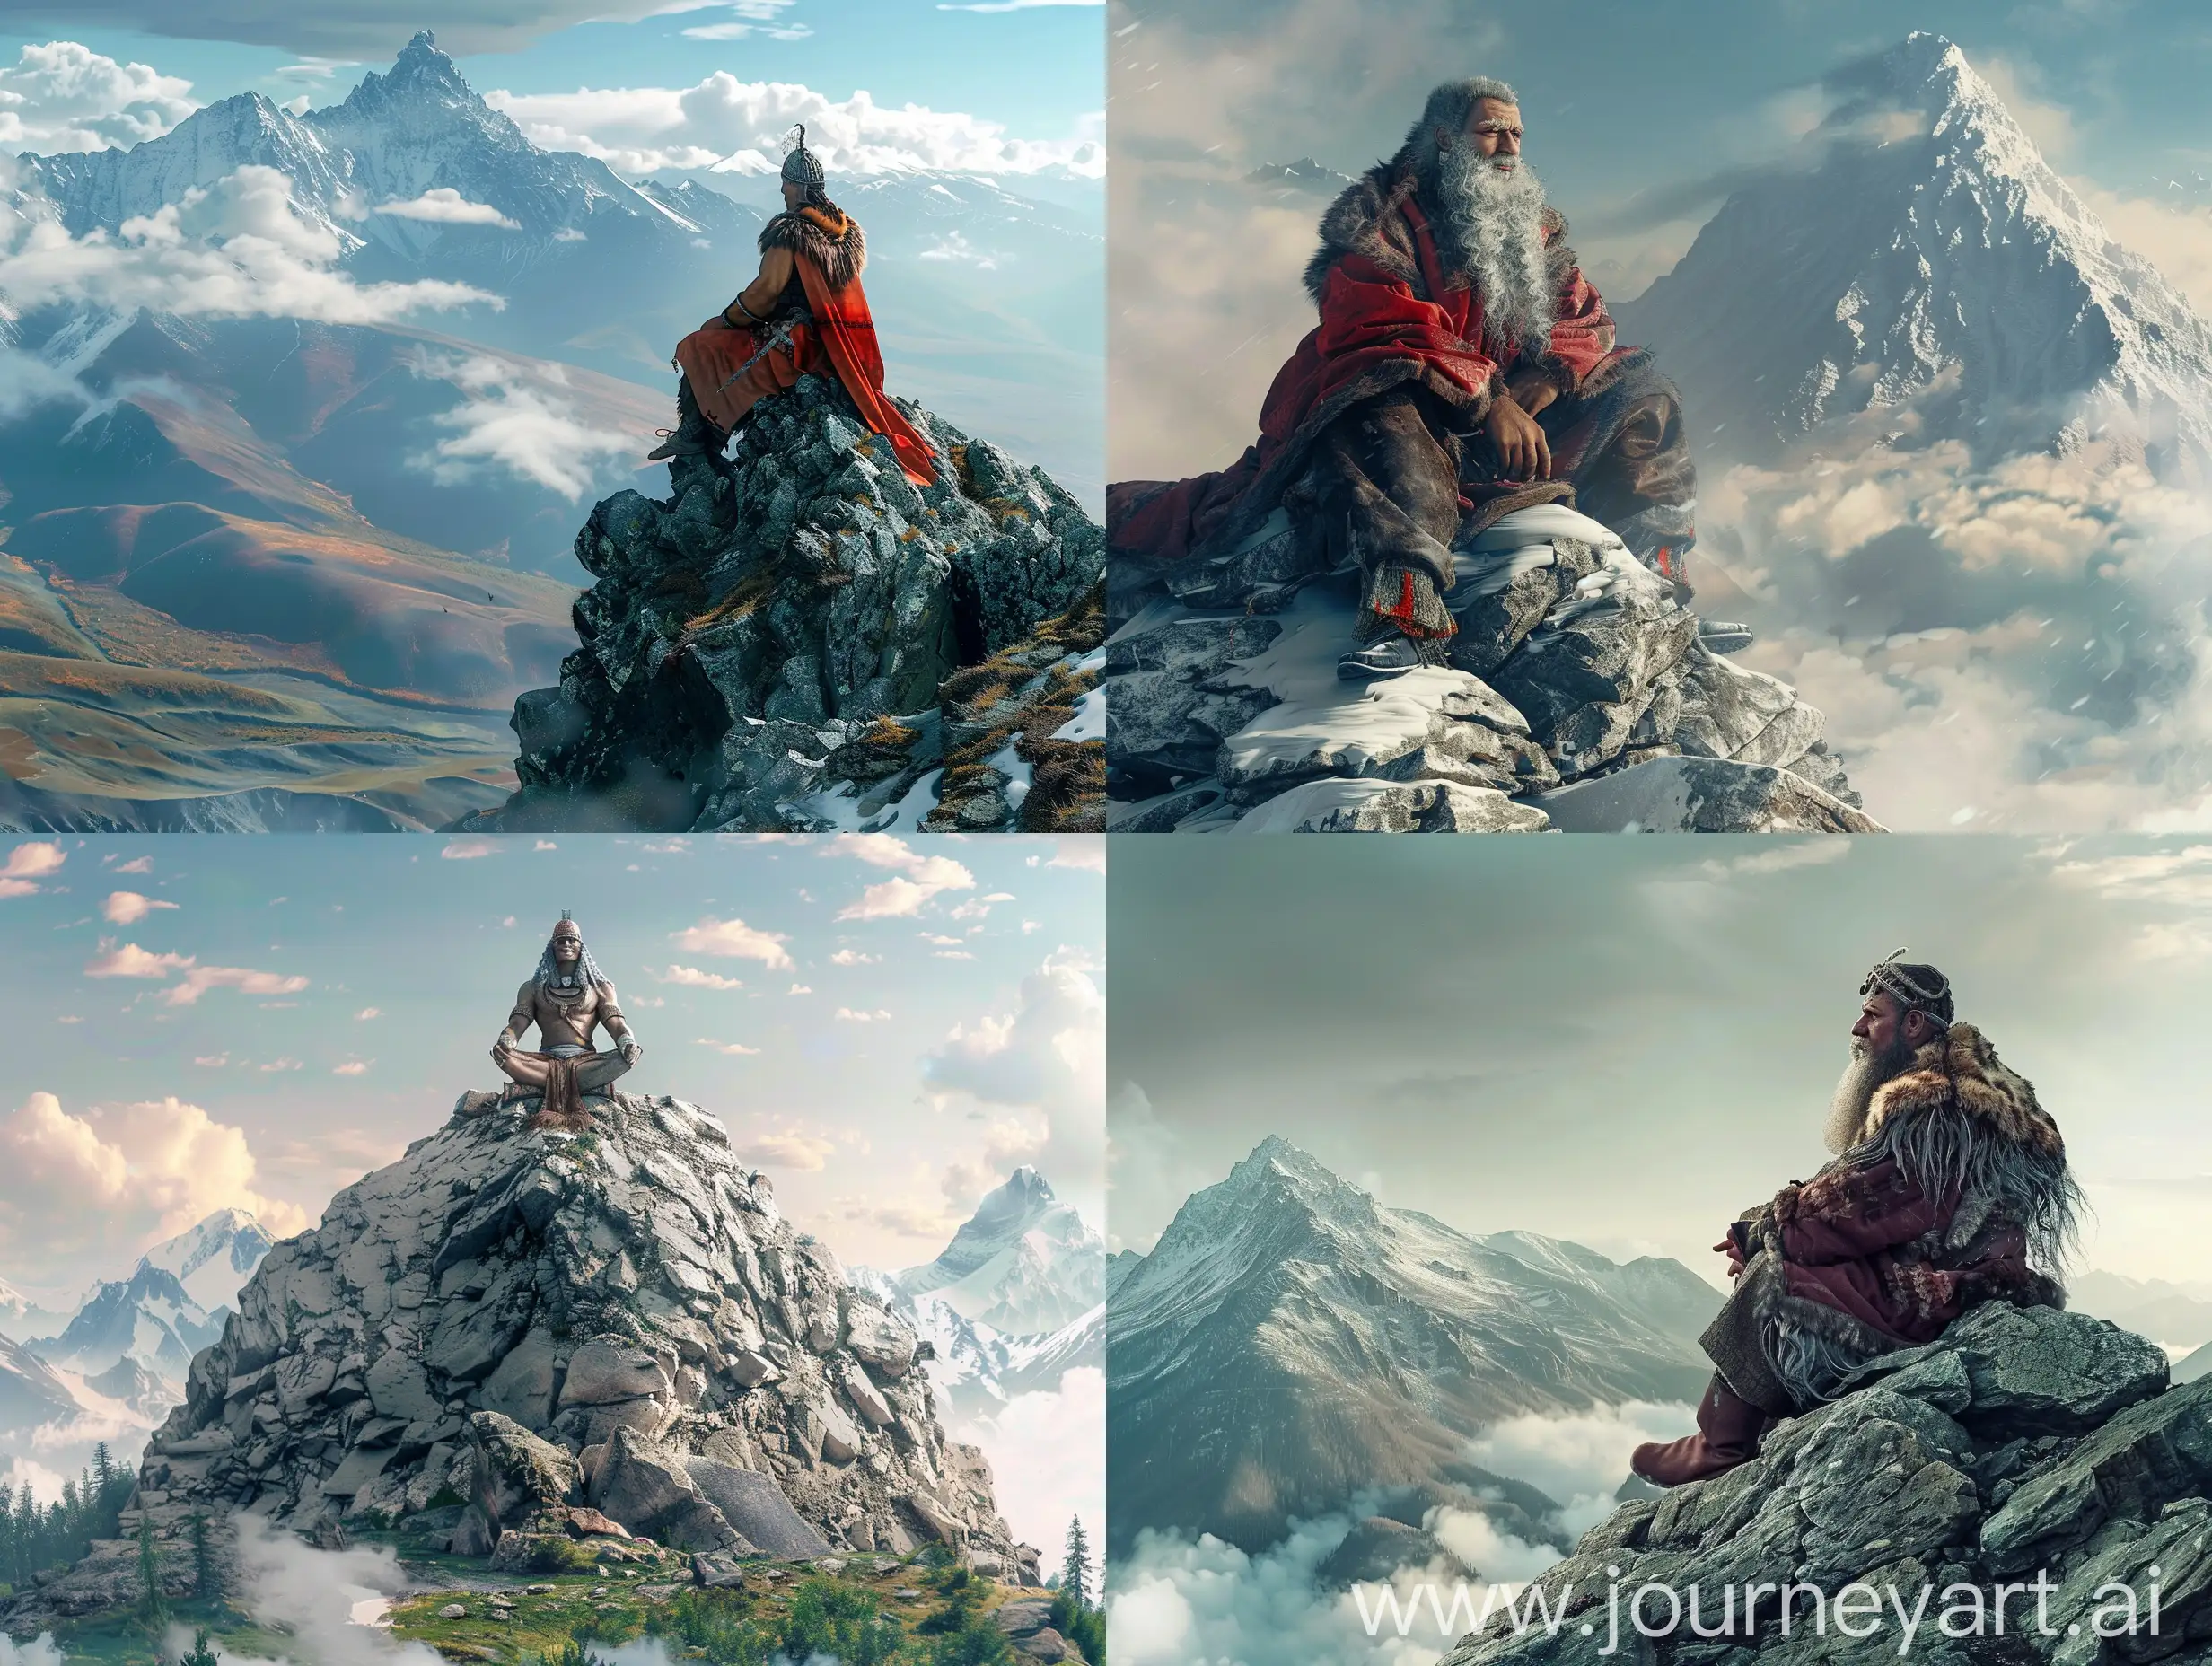 The mighty god of Altai, the Adam-Khan, a realistic pro photo, seated on top of a big Altai mountain, overlooking his world